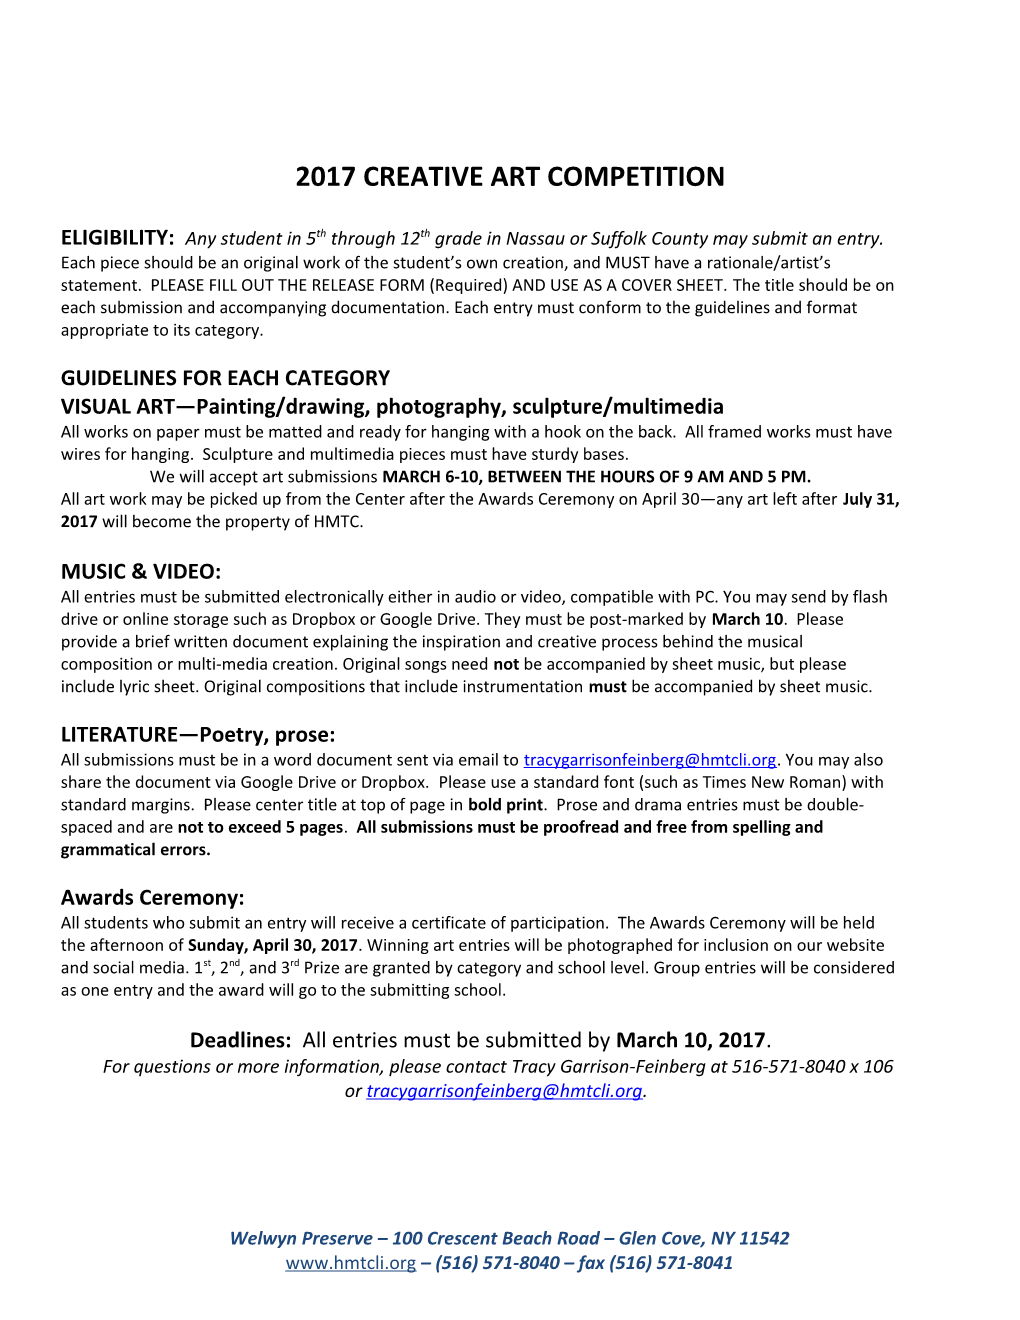 2017 Creative Art Competition